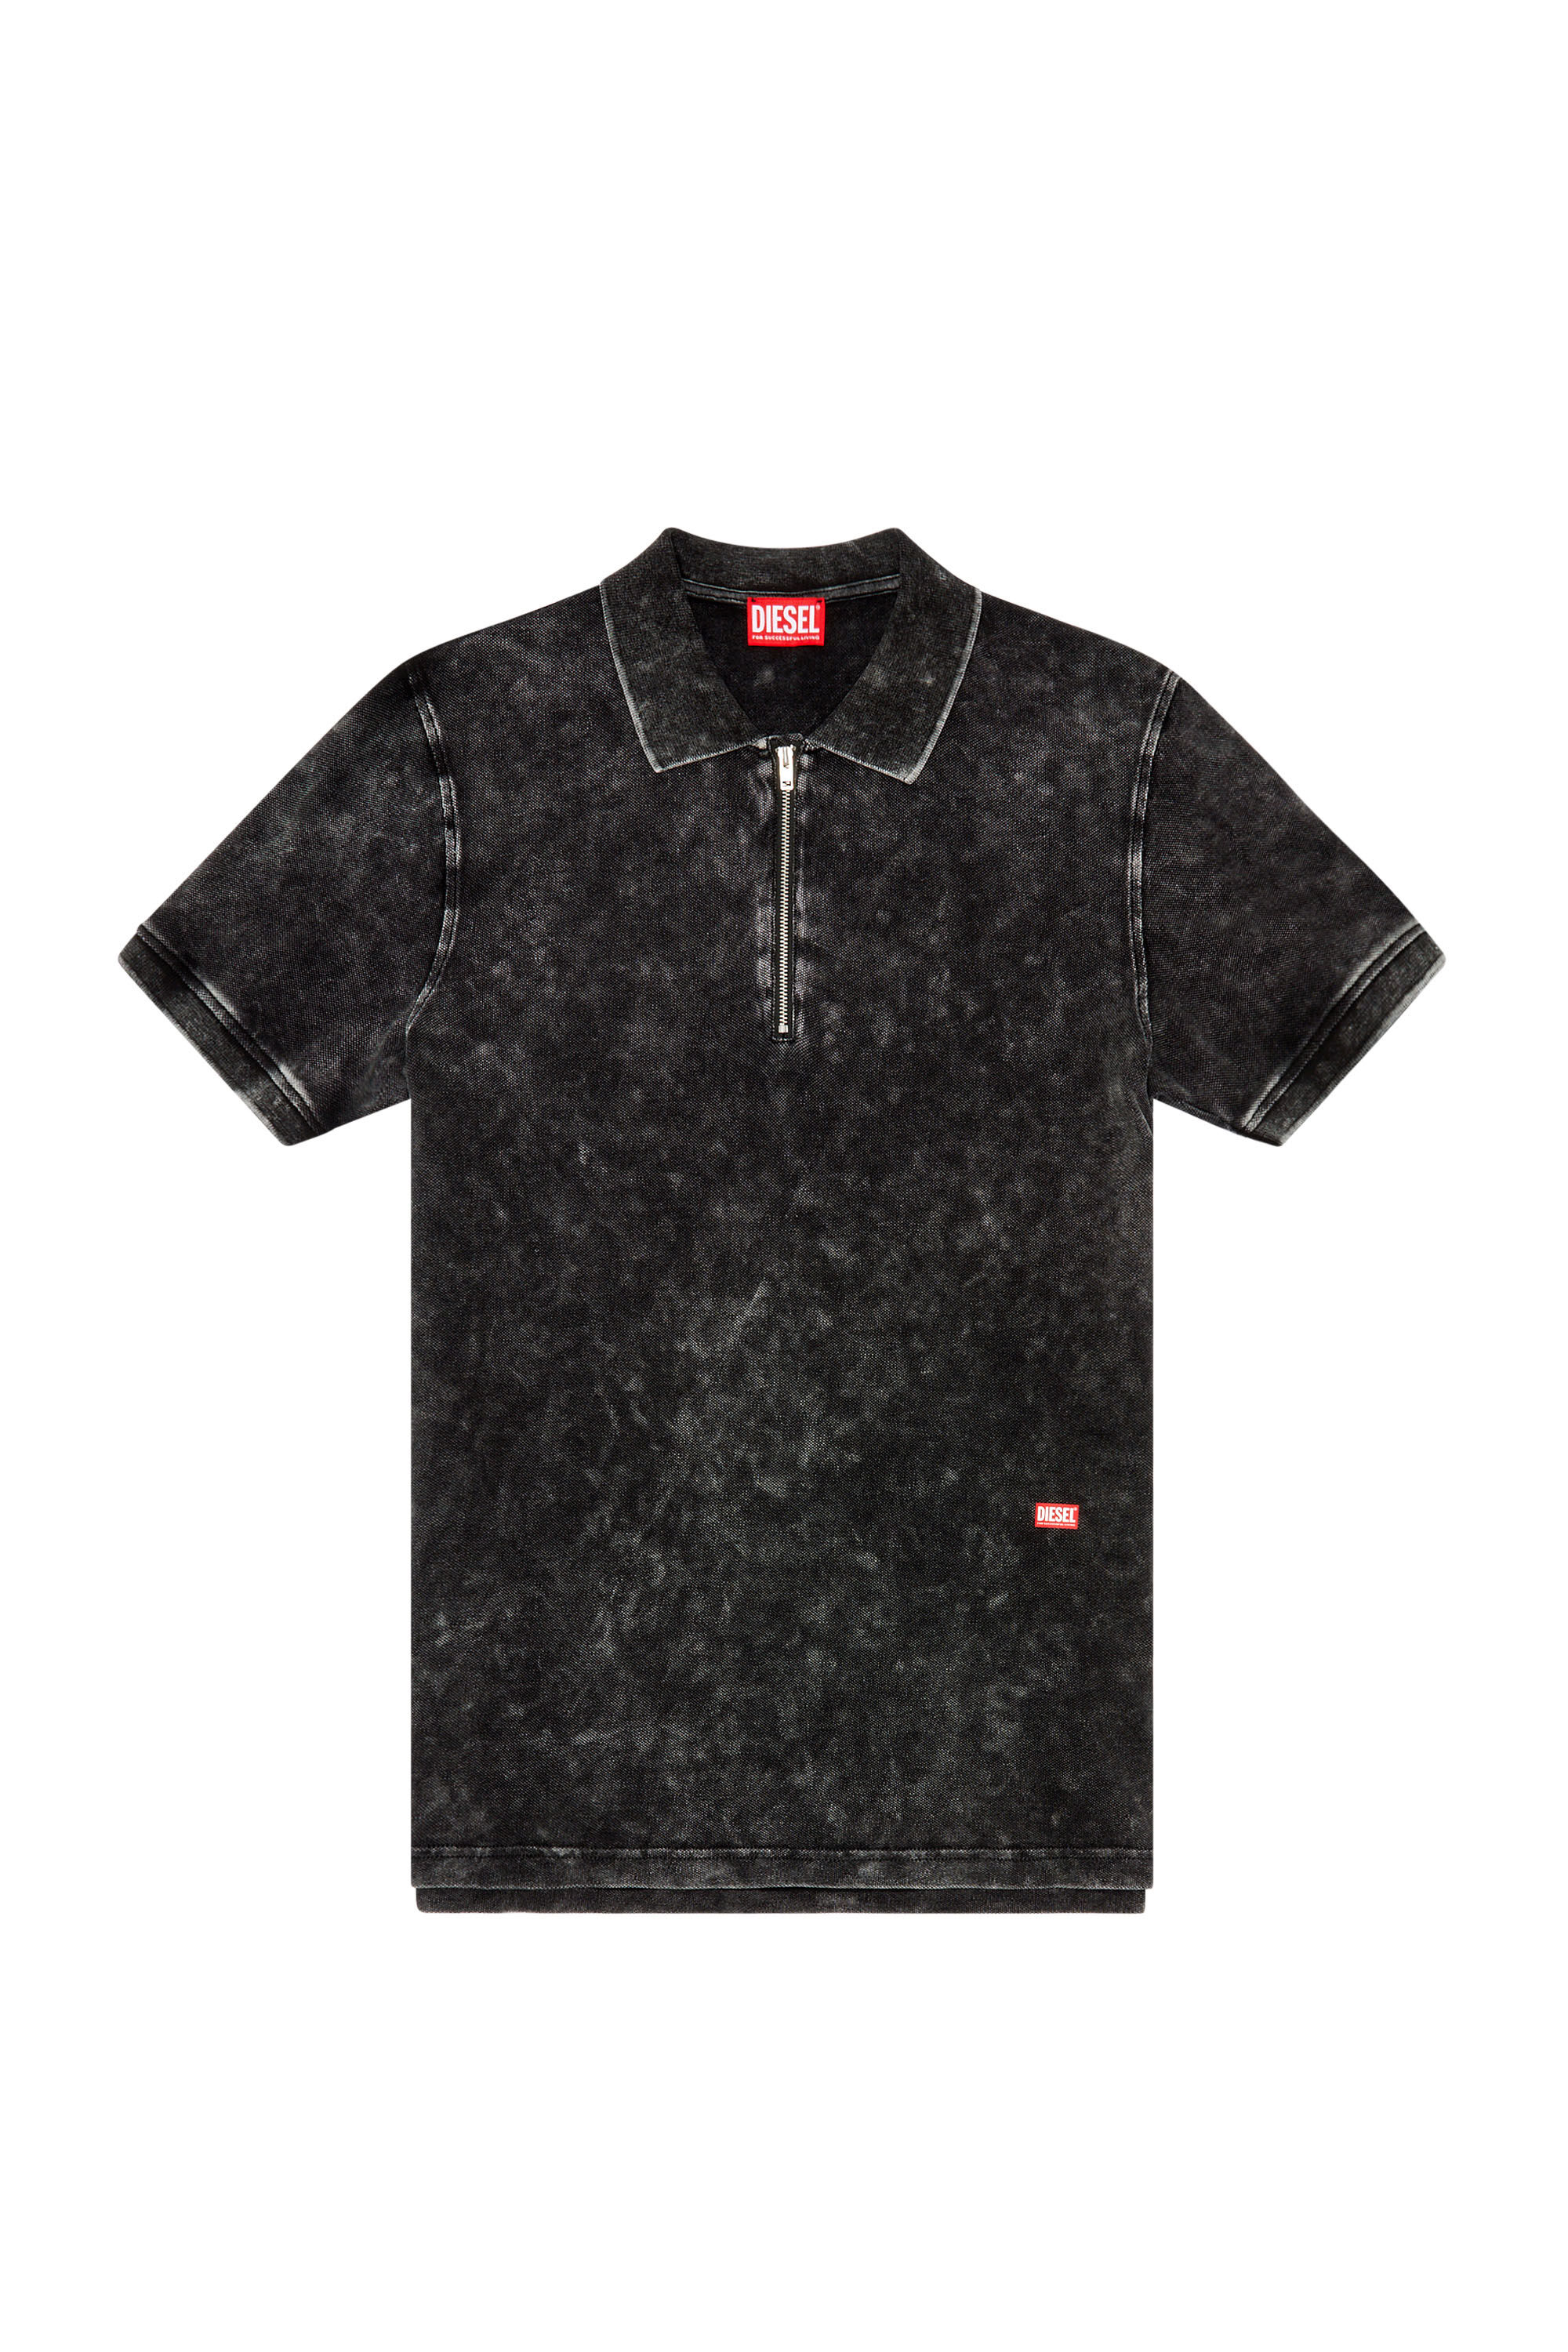 Diesel - T-SMITH-ZIP, Man Polo shirt in faded piqué in Black - Image 2